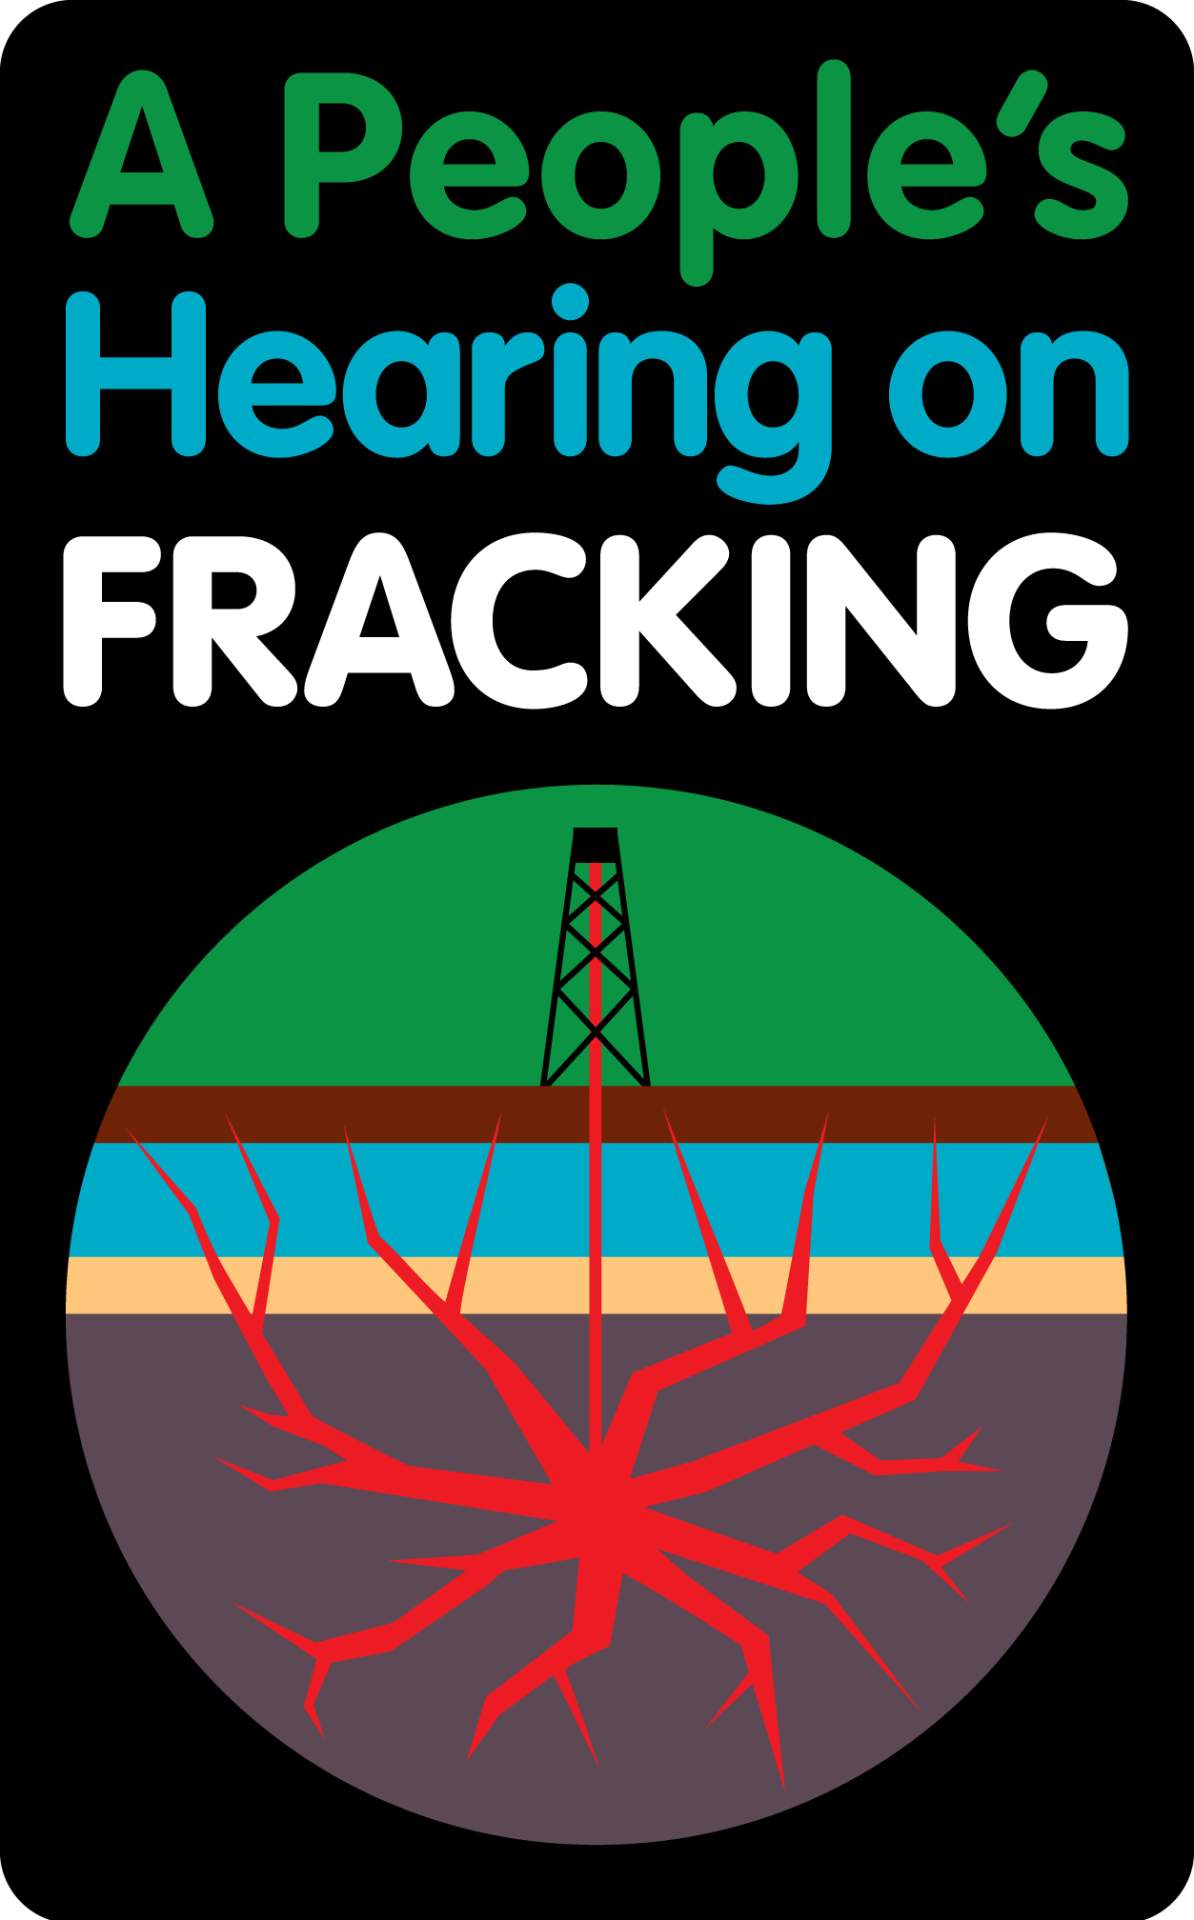 A People's Hearing on Fracking